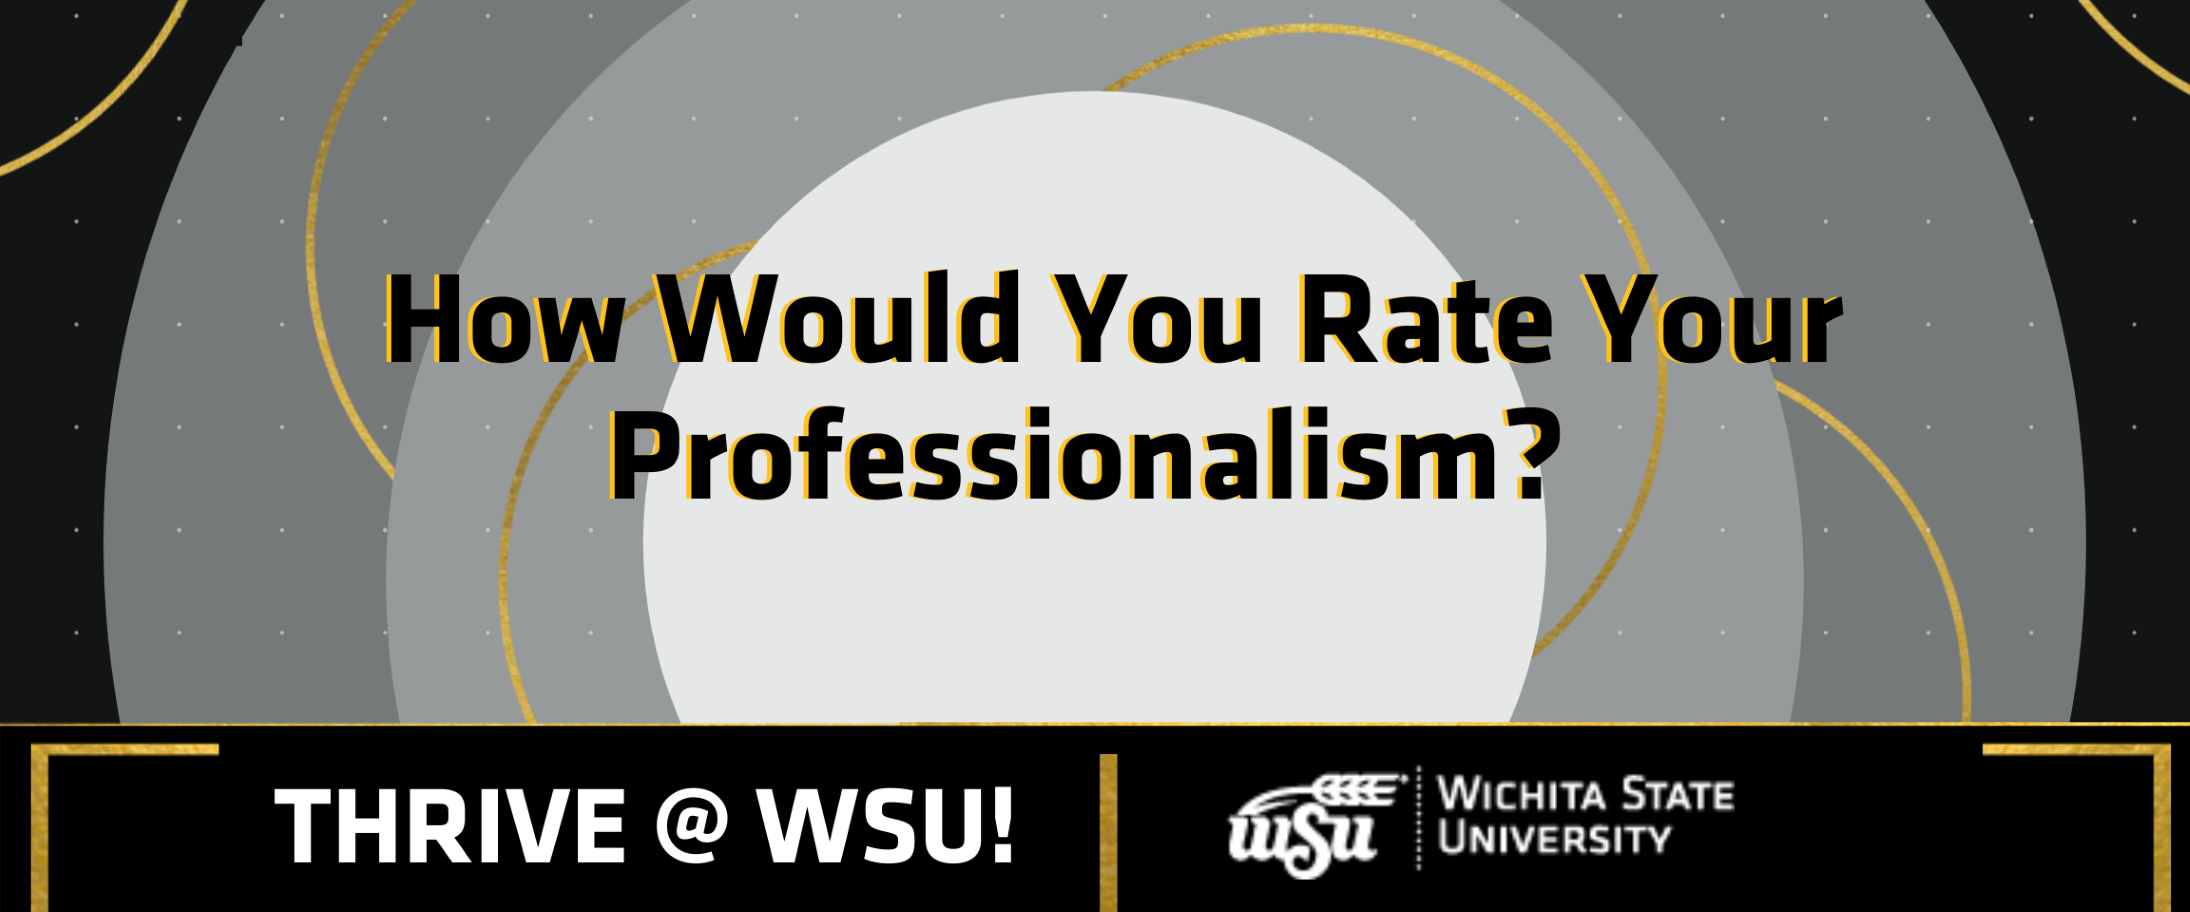 How Would You Rate Your Professionalism?